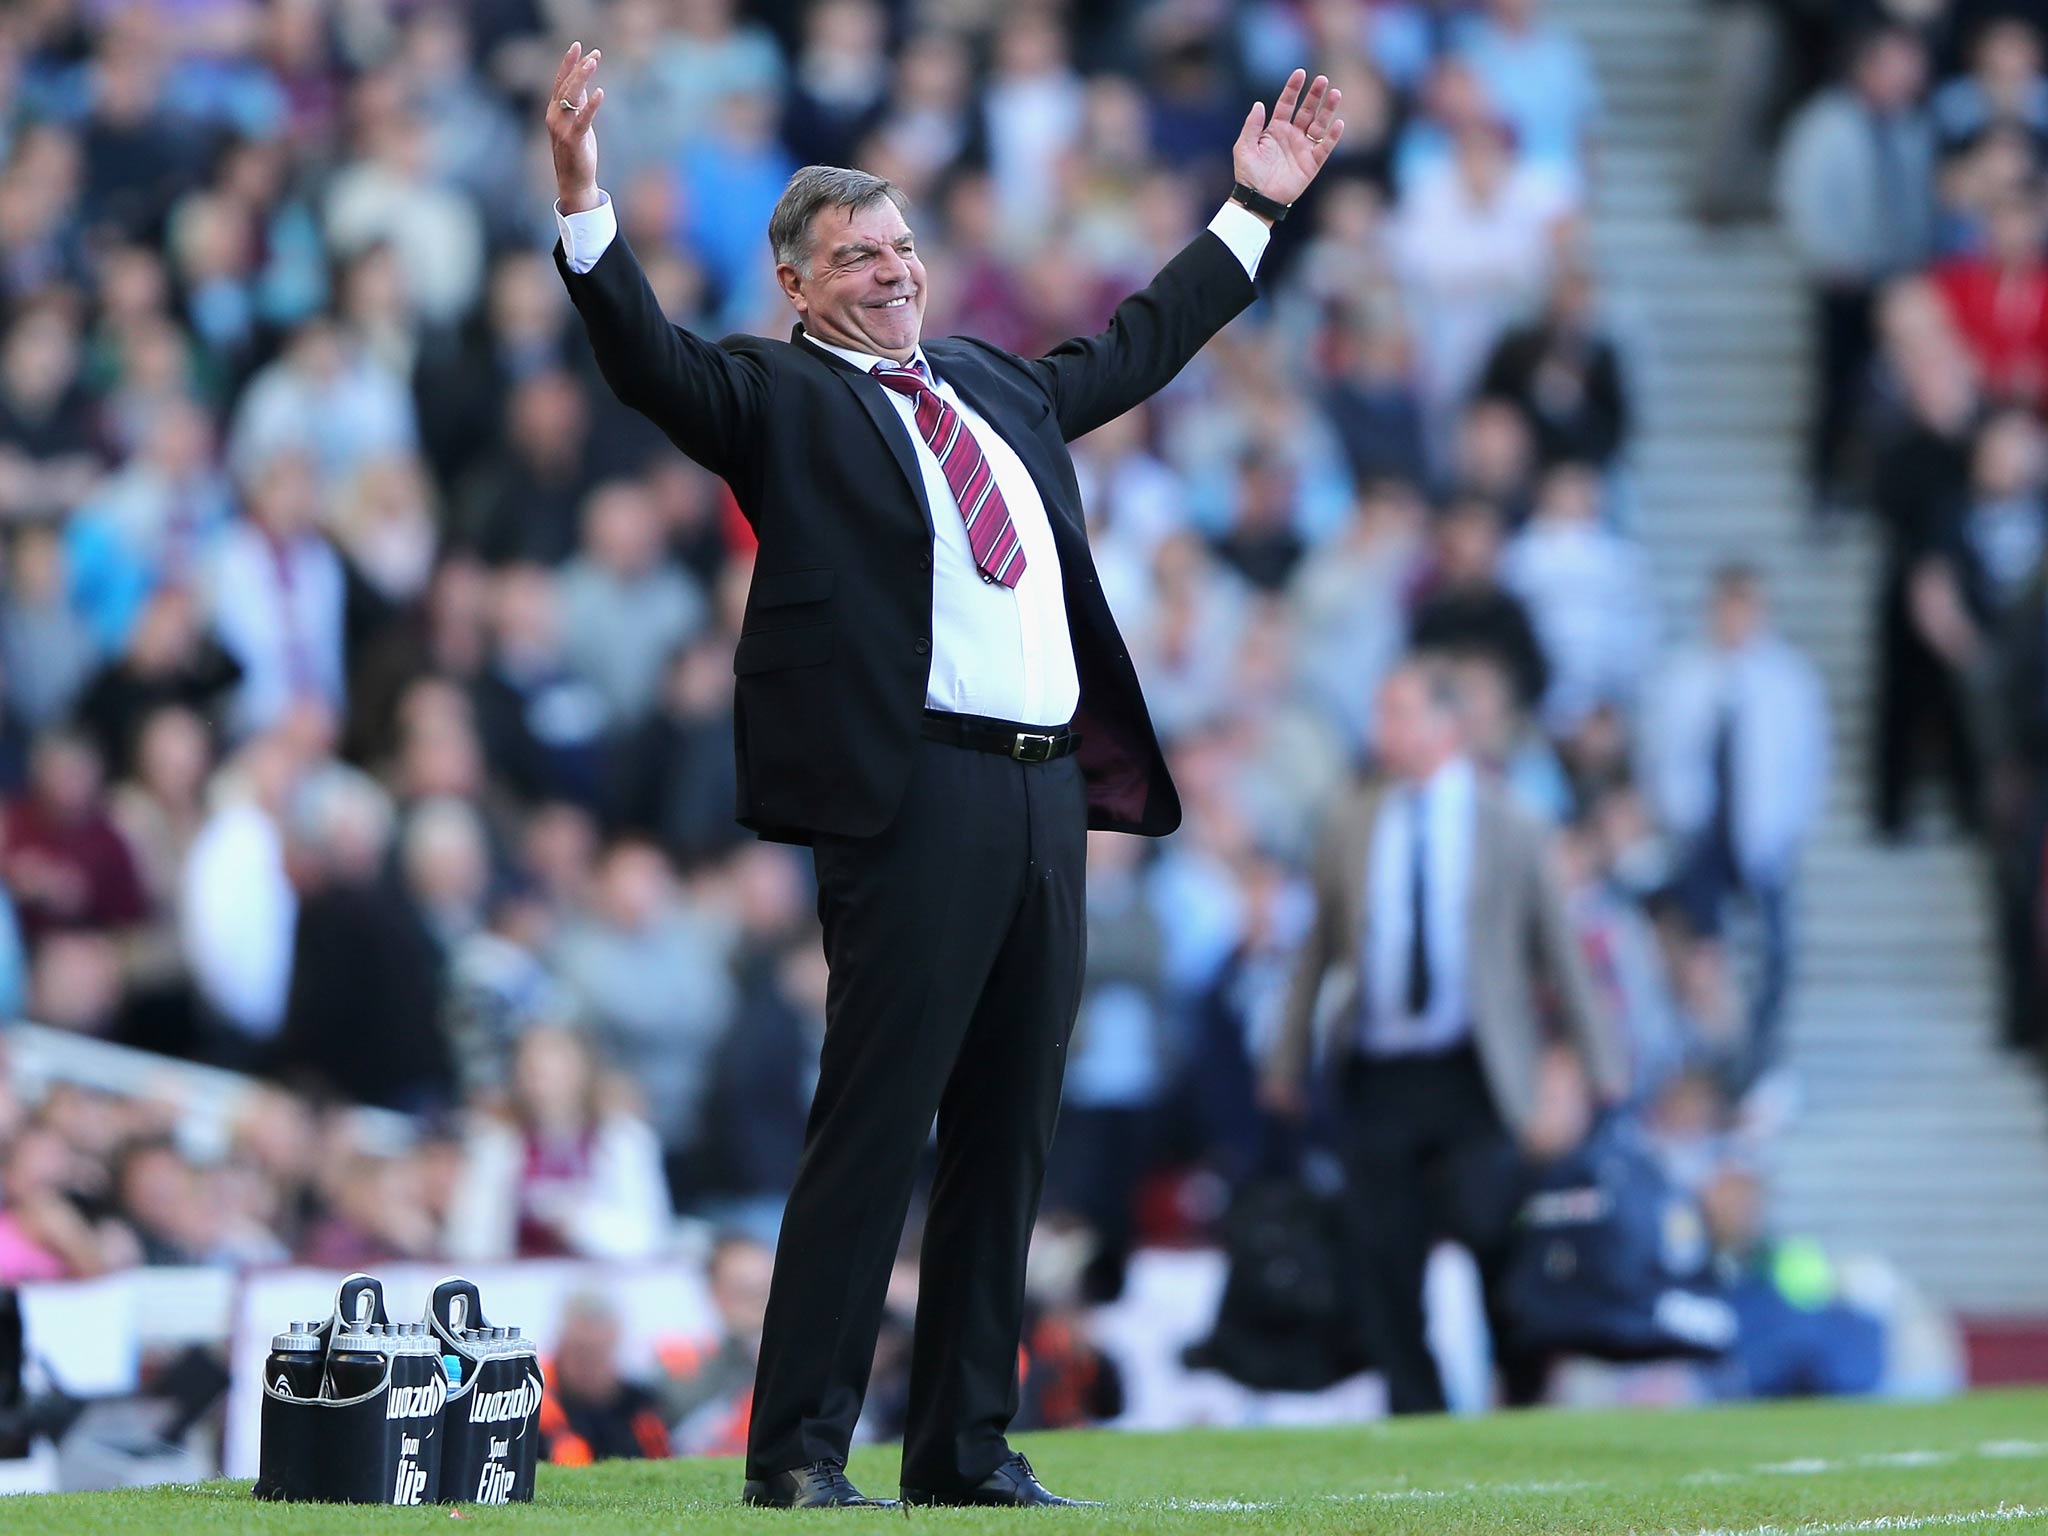 Sam Allardyce remonstrates on the sideline as his side draw with Newcastle United